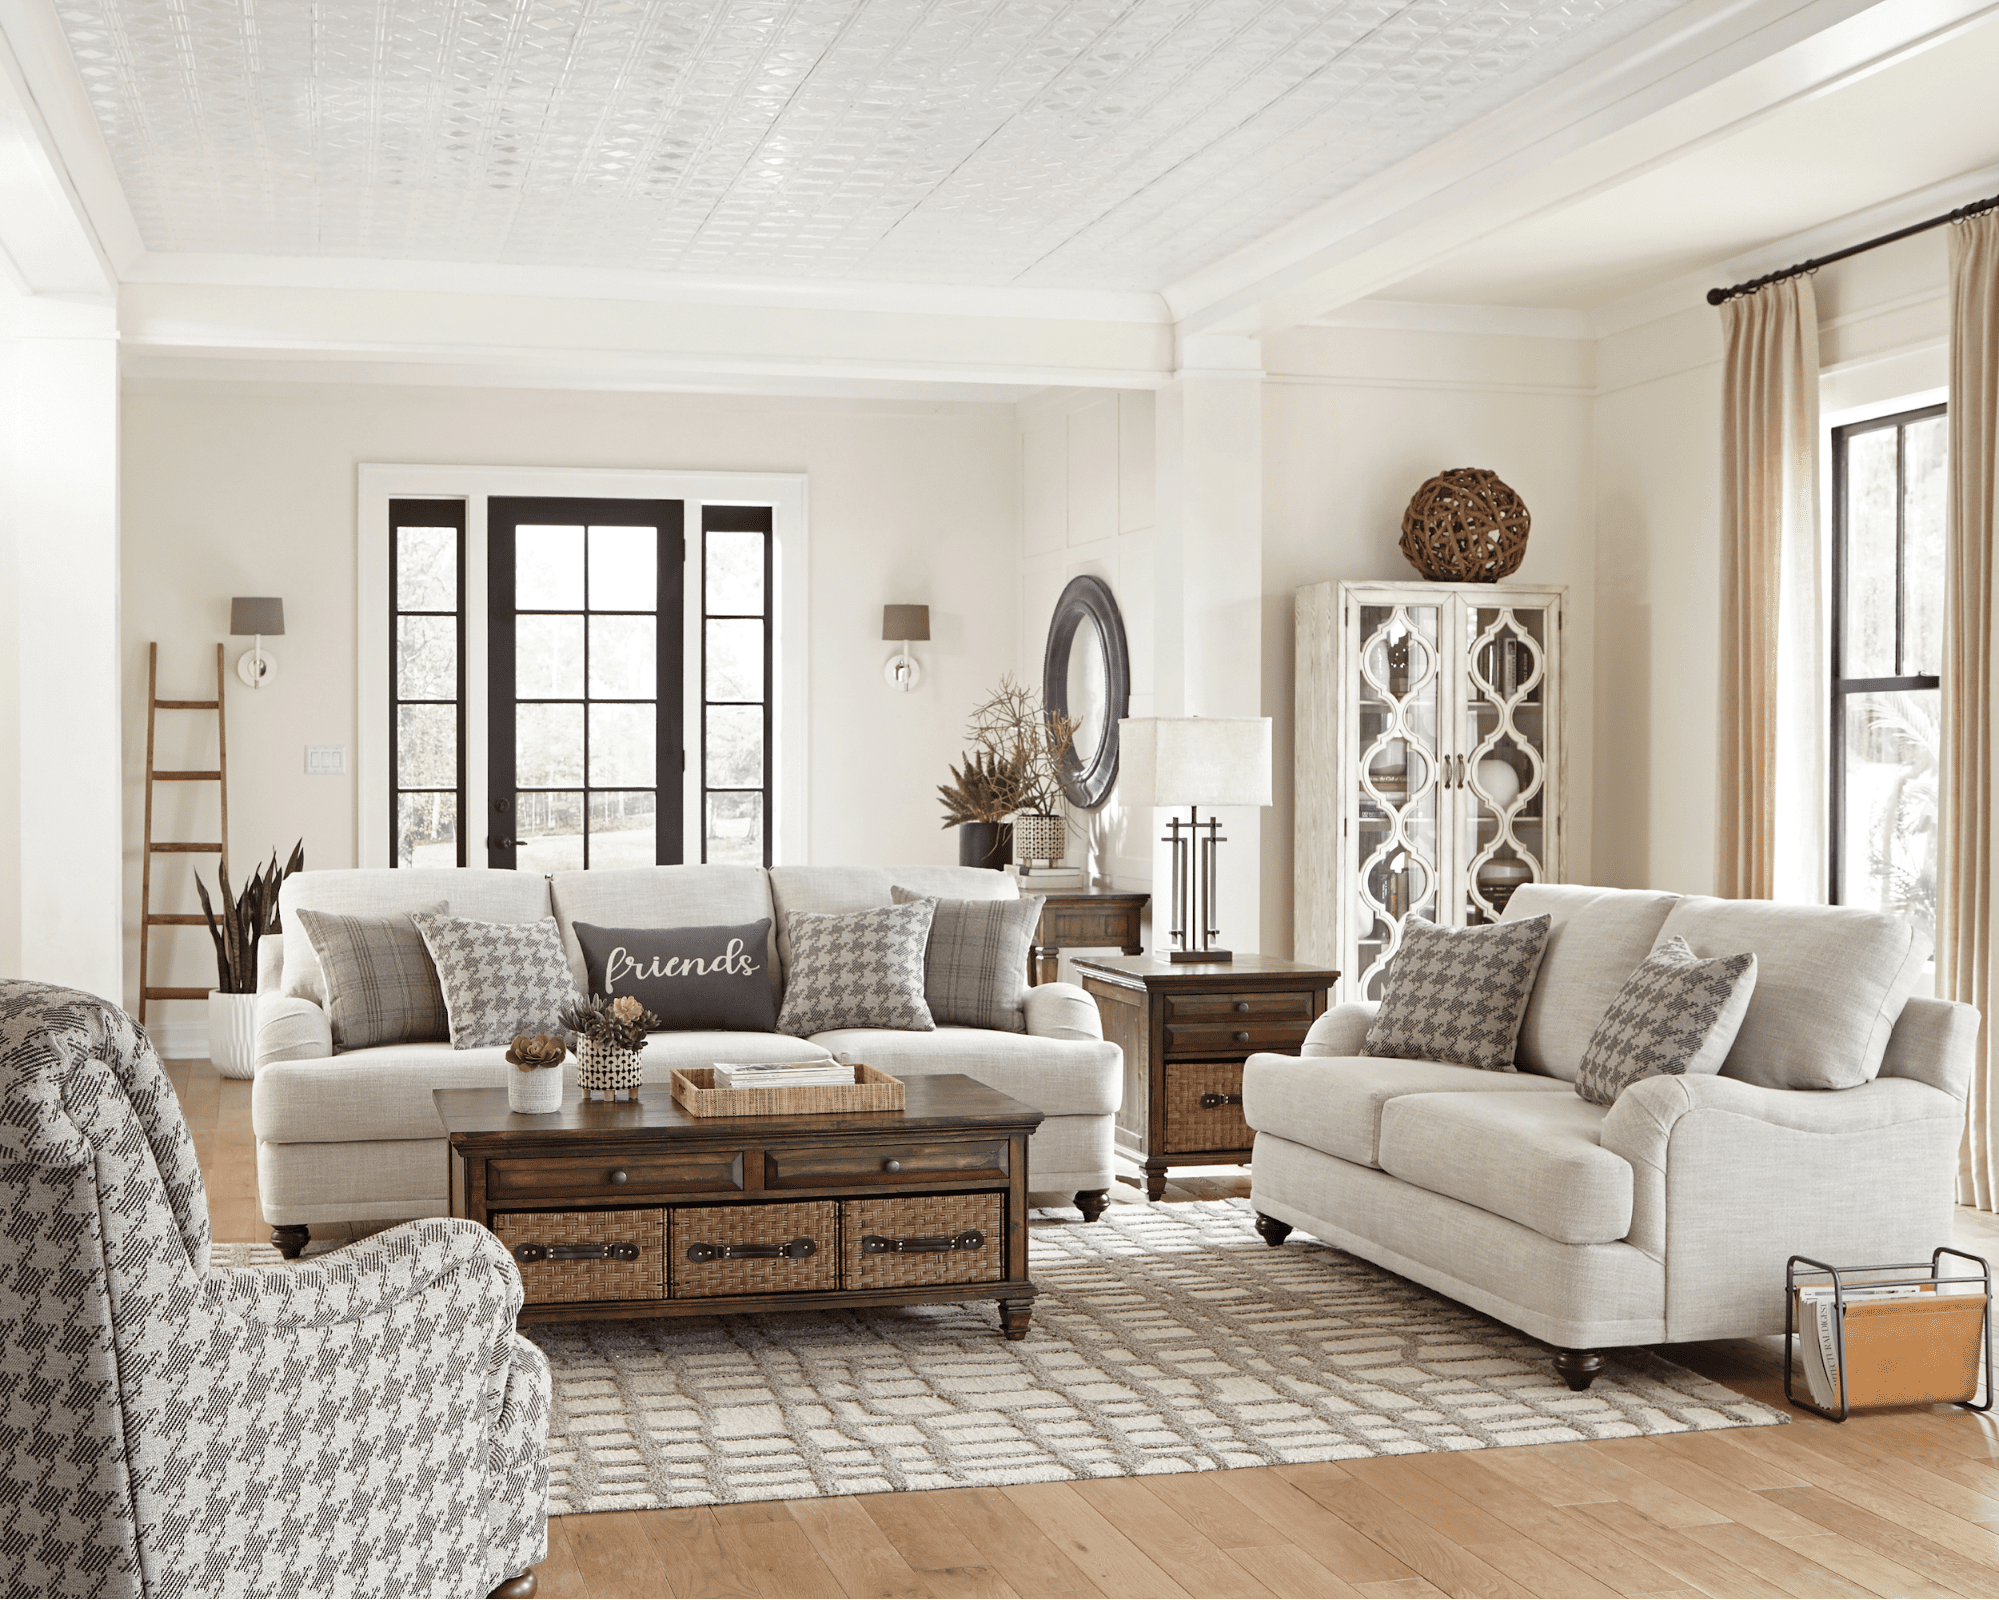 Living room layout ideas: 9 fun ways to switch it up - Coast